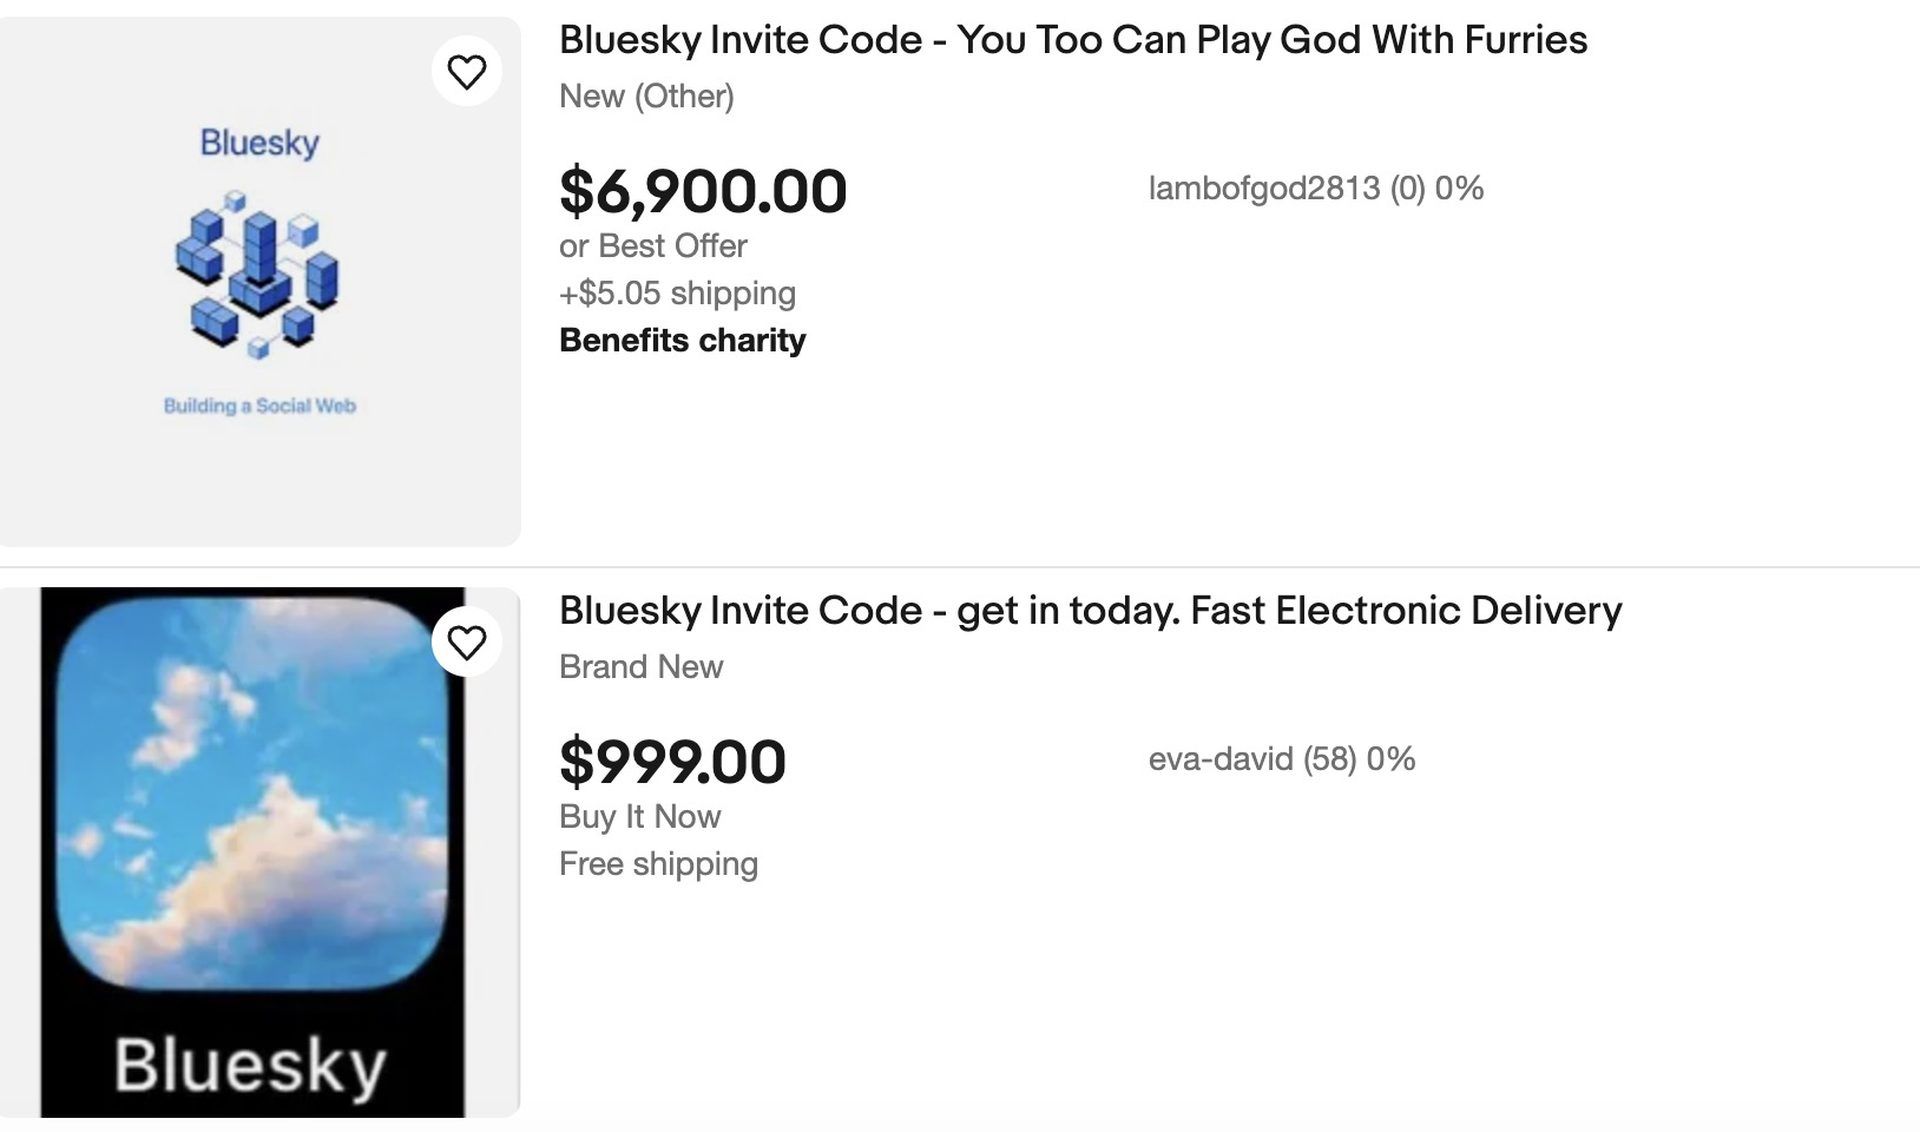 Is Twitter expensive? Bluesky invite codes are on sale for thousands of dollars